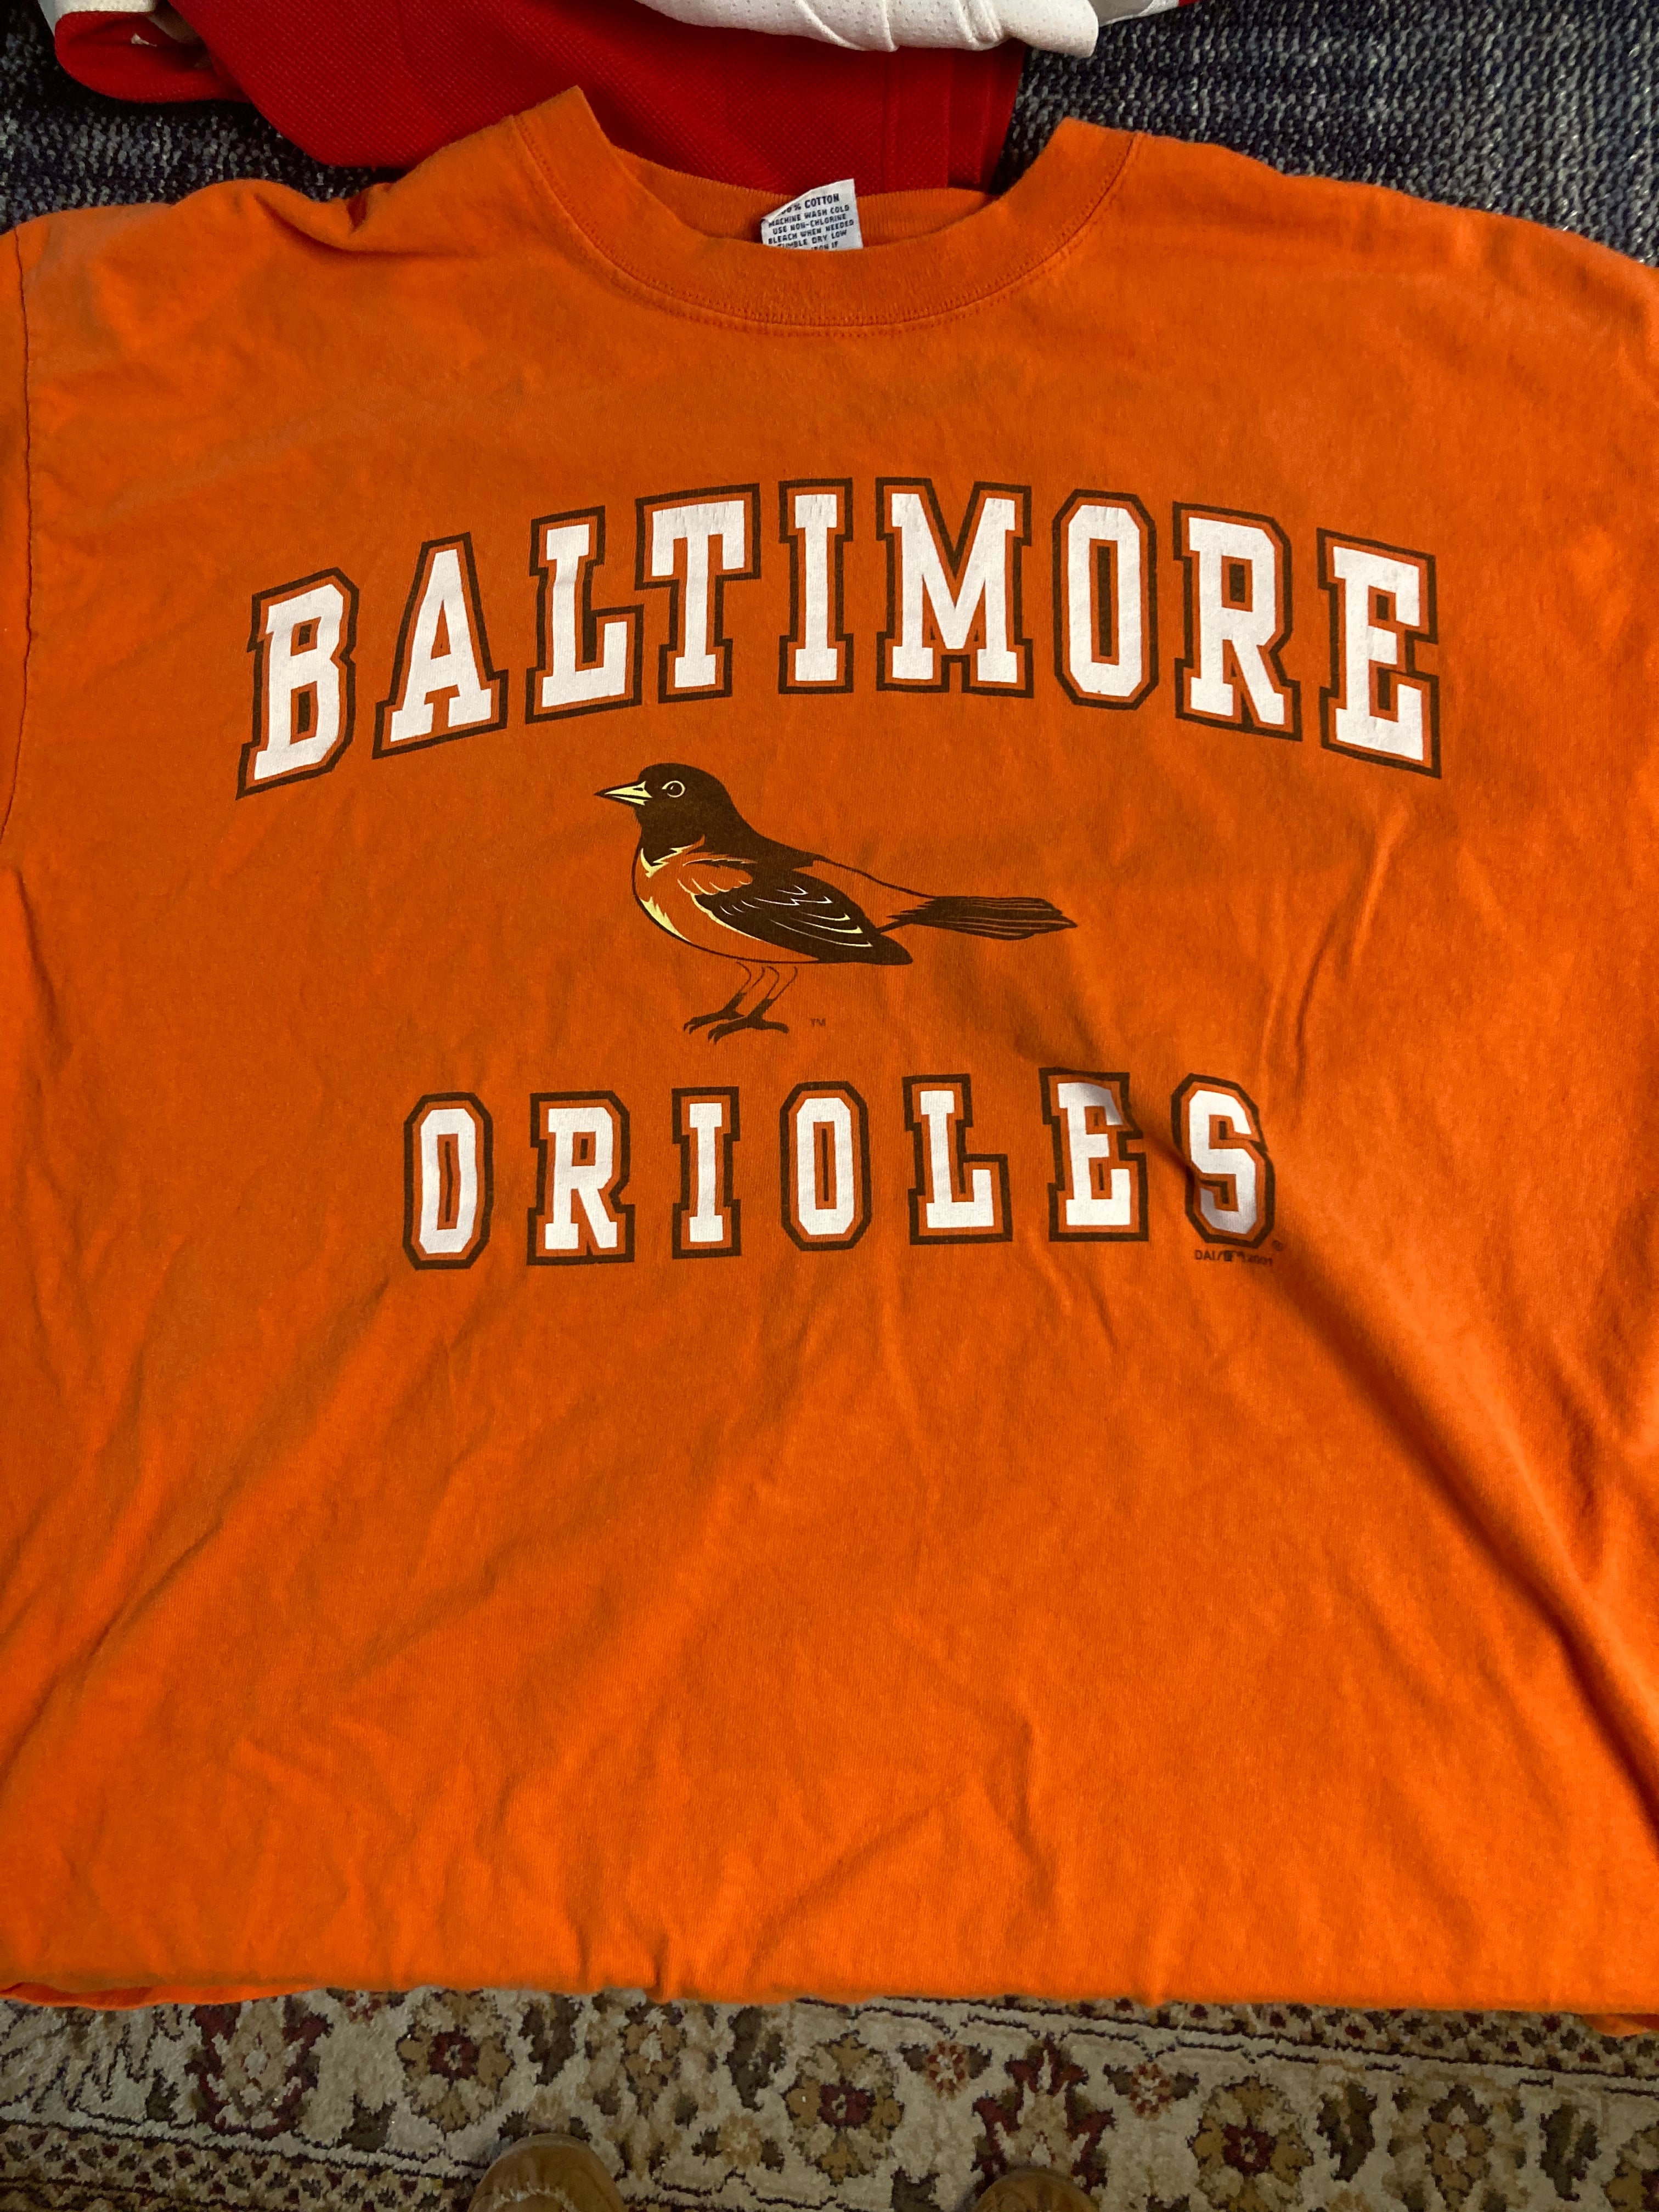 MLB MAJESTIC BALTIMORE ORIOLES LONG SLEEVE BLACK T-SHIRT SIze-Large Great  Cond